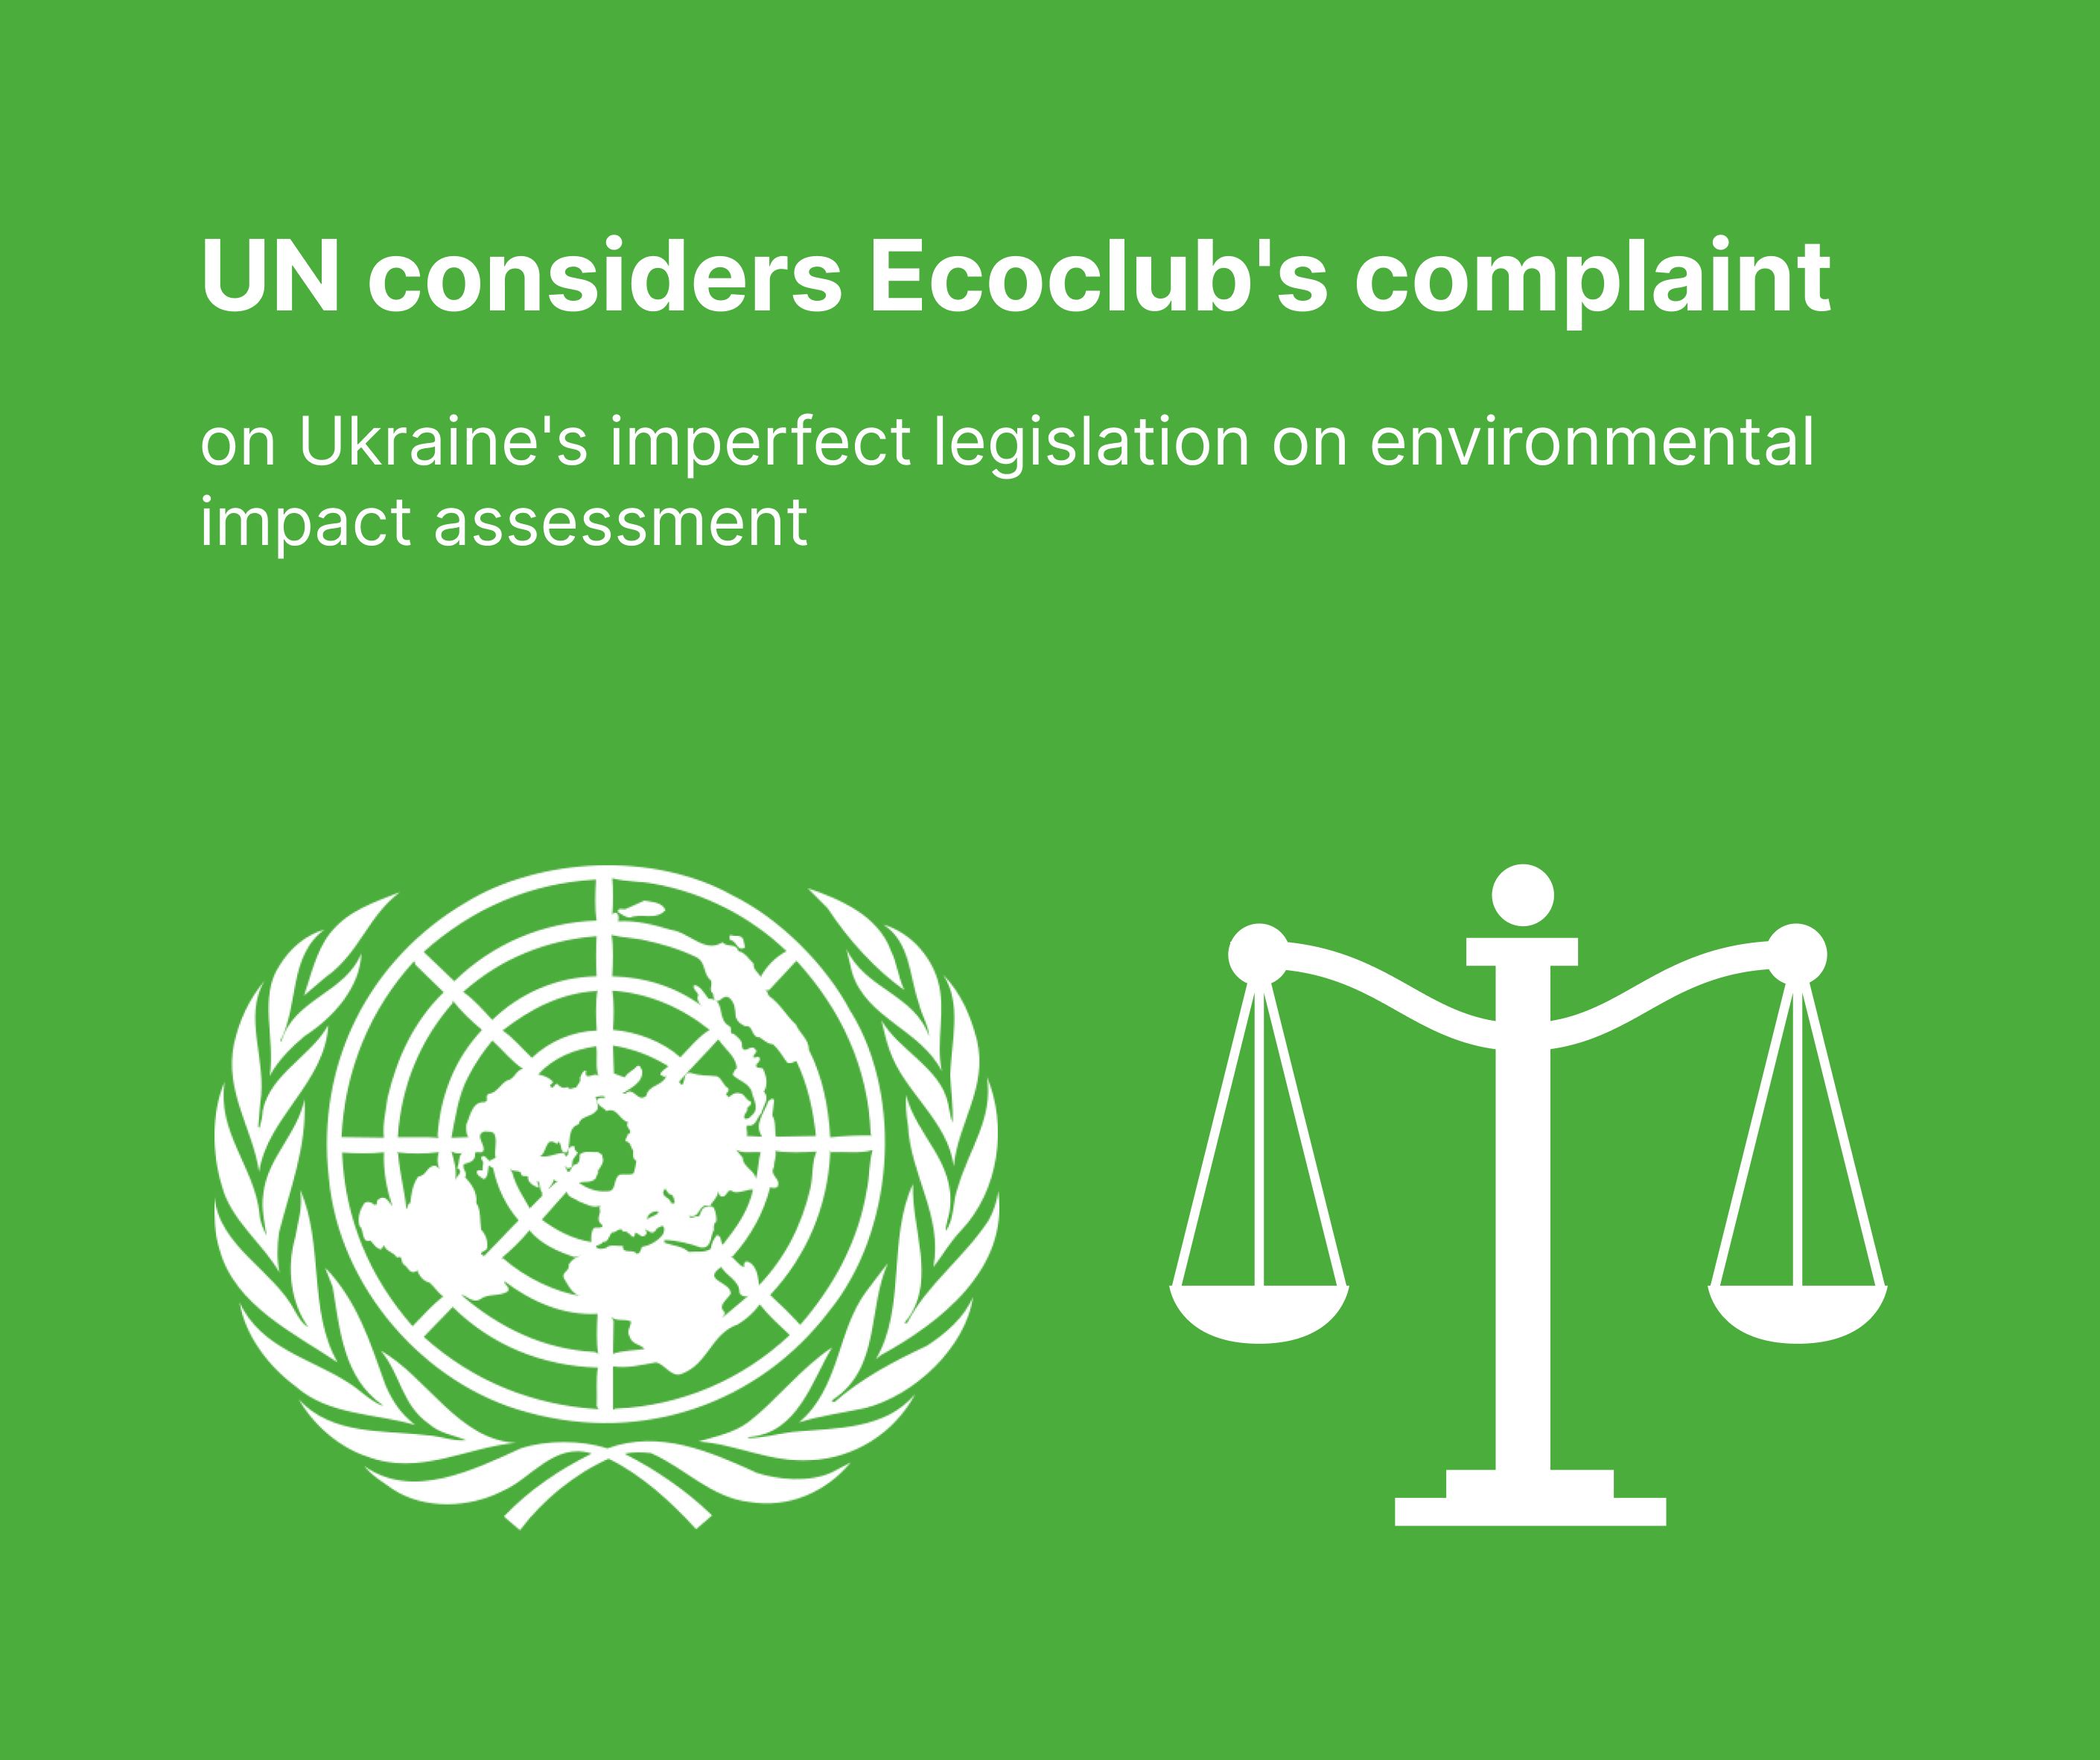 UN is considering Ecoclub’s complaint relating the shortcomings of Ukrainian legislation on environmental impact assessment